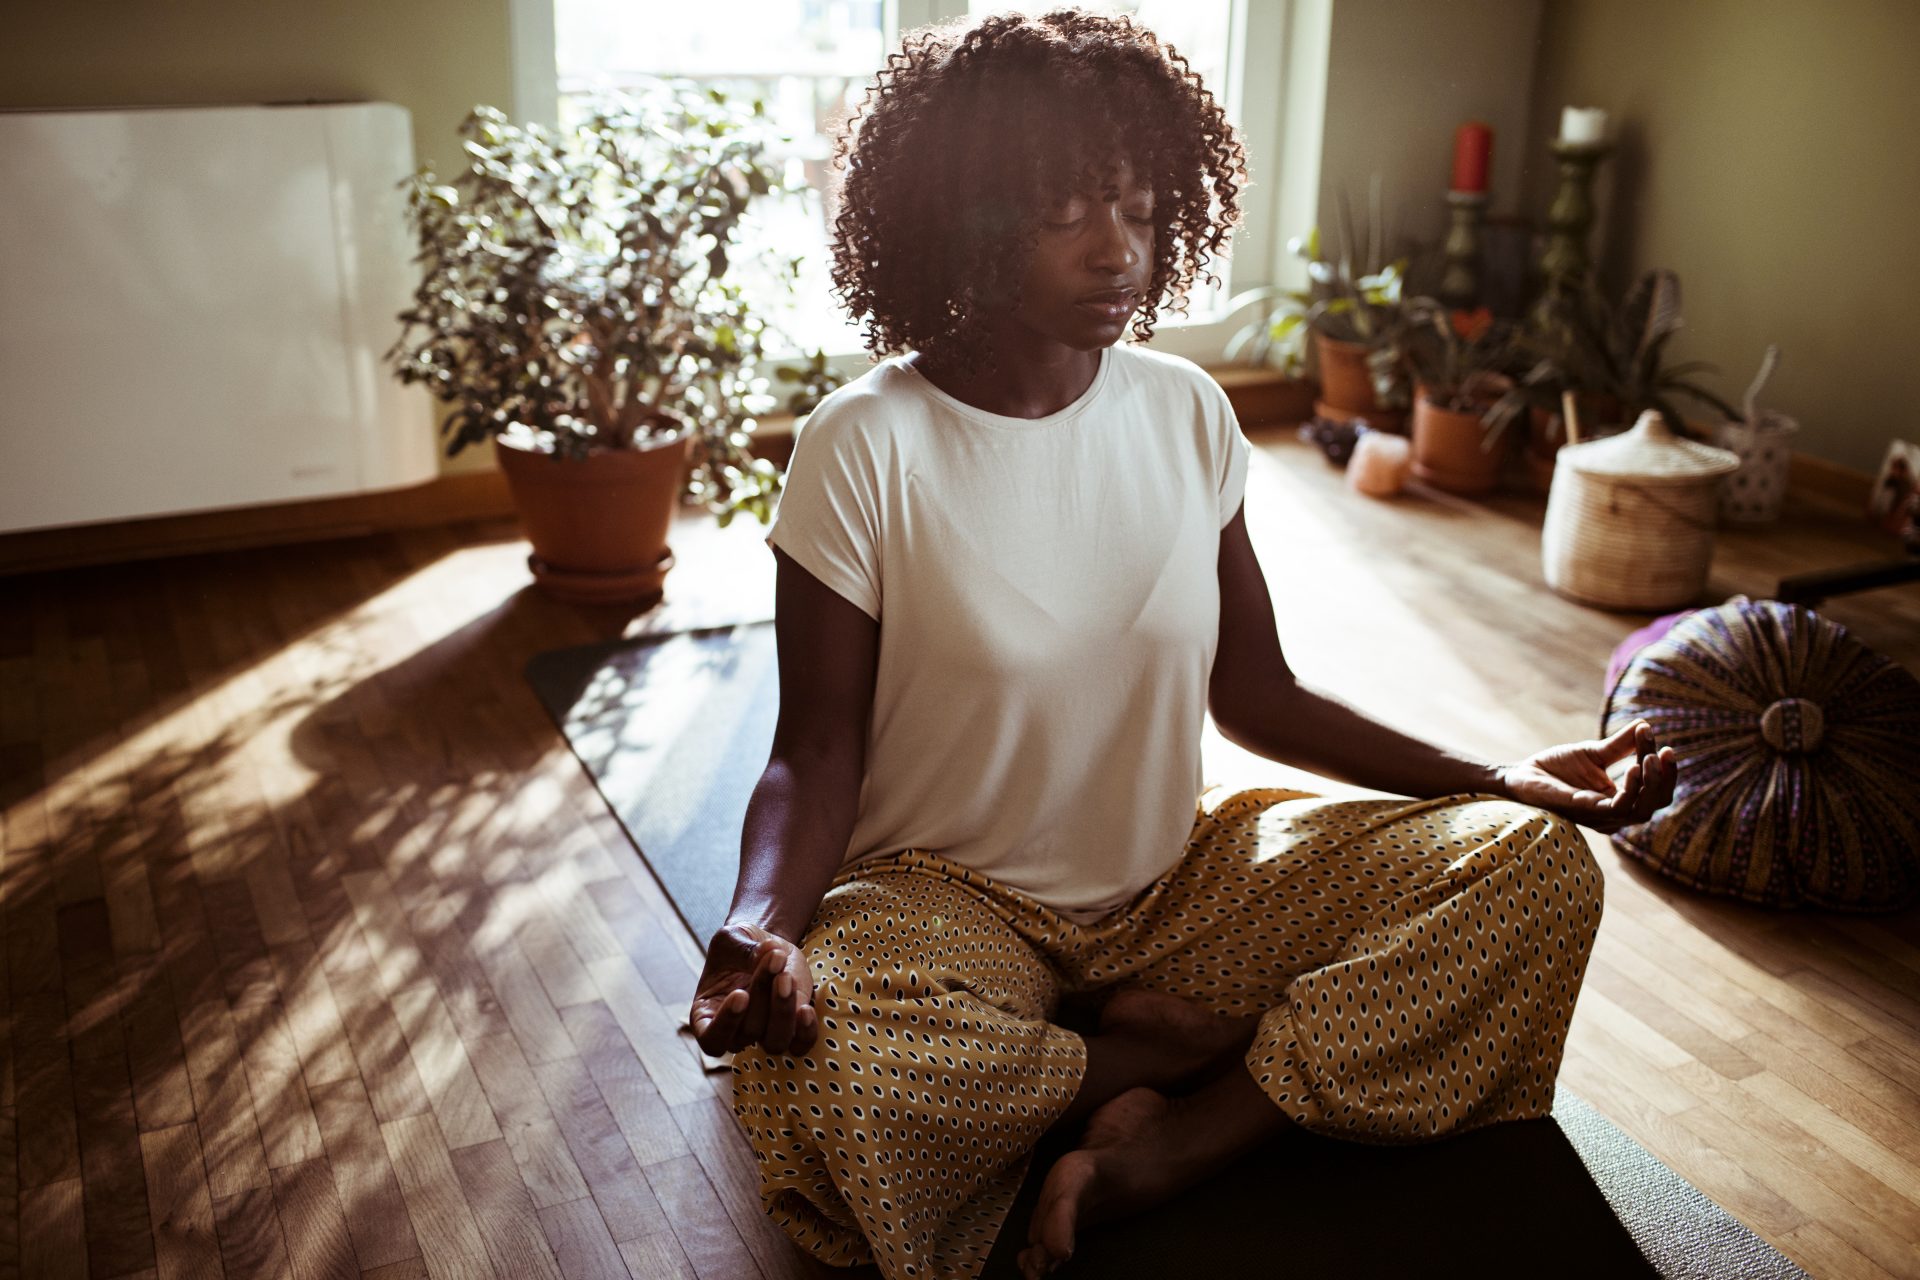 The benefits of meditation: how the practice helps mental health